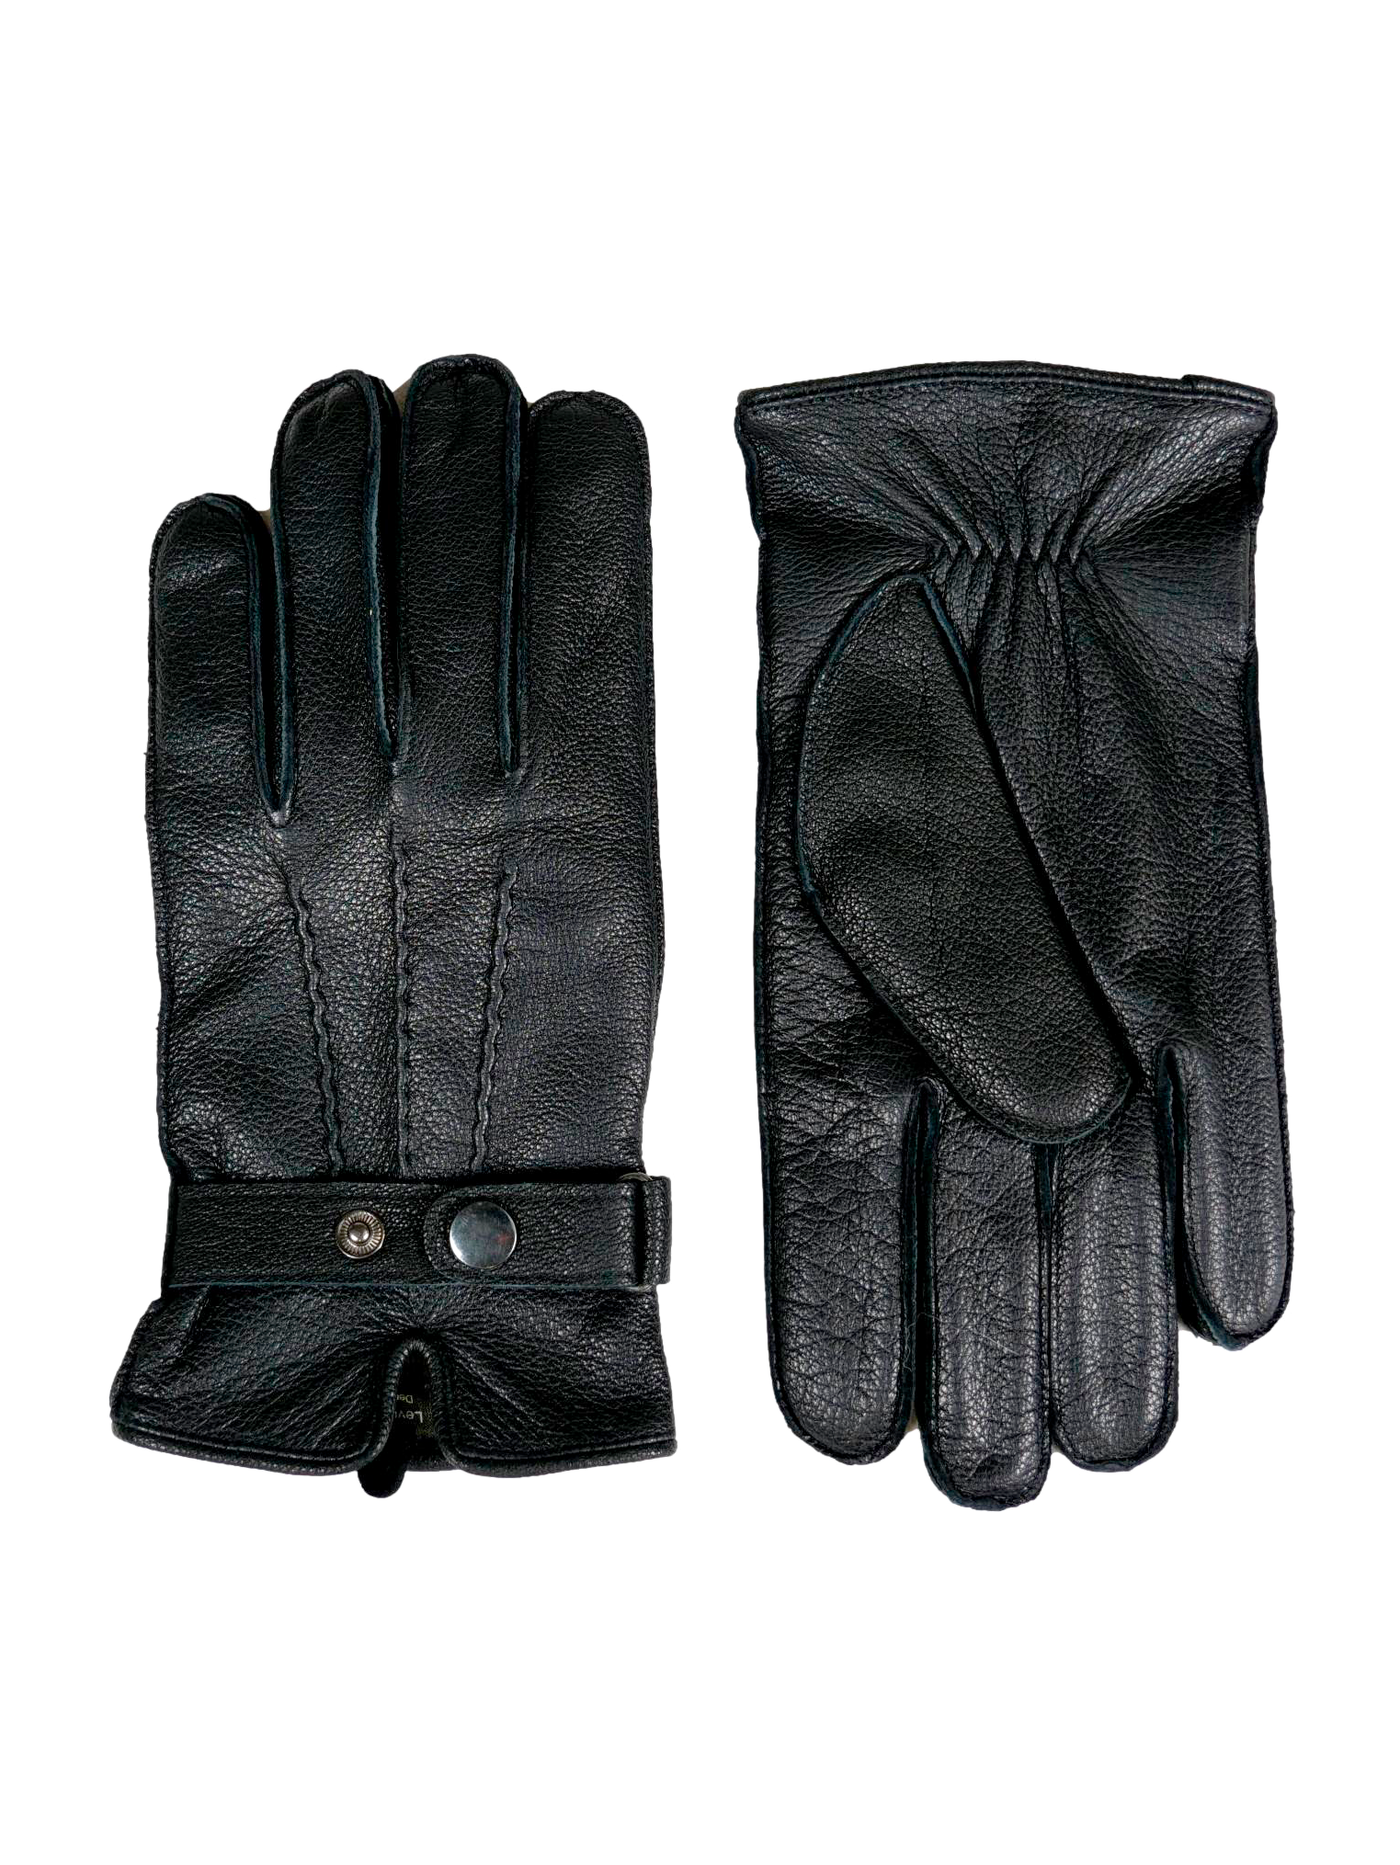 162 Gloves - Goat Leather - Accesories - Black